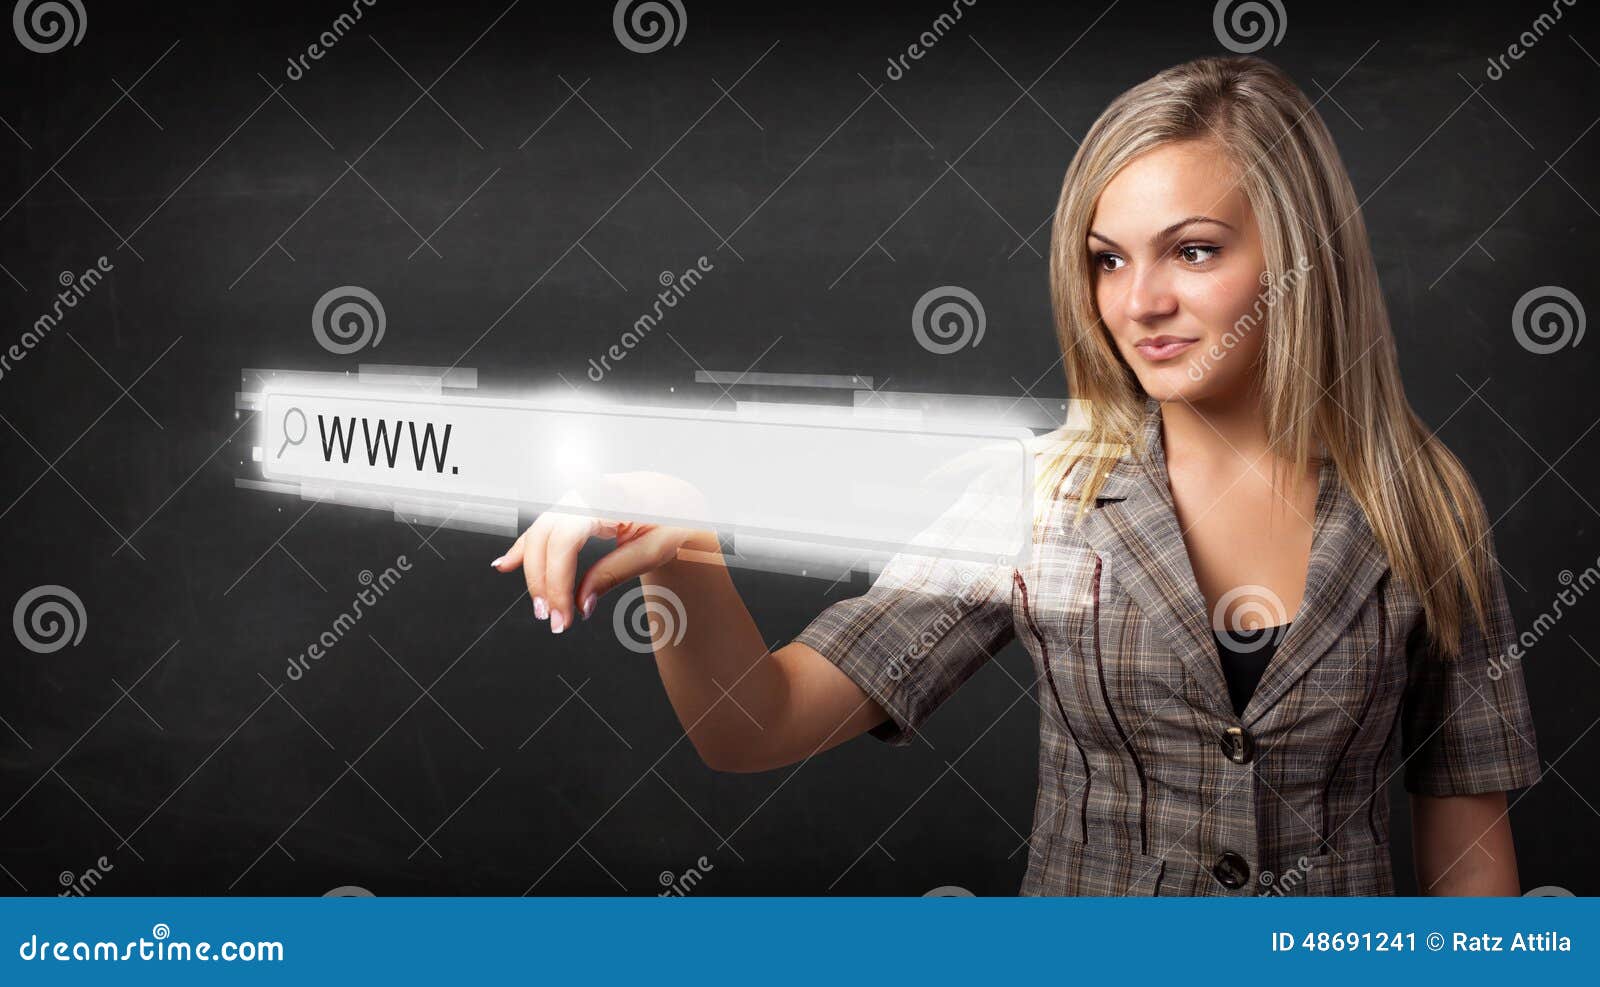 young businesswoman touching web browser address bar with www si